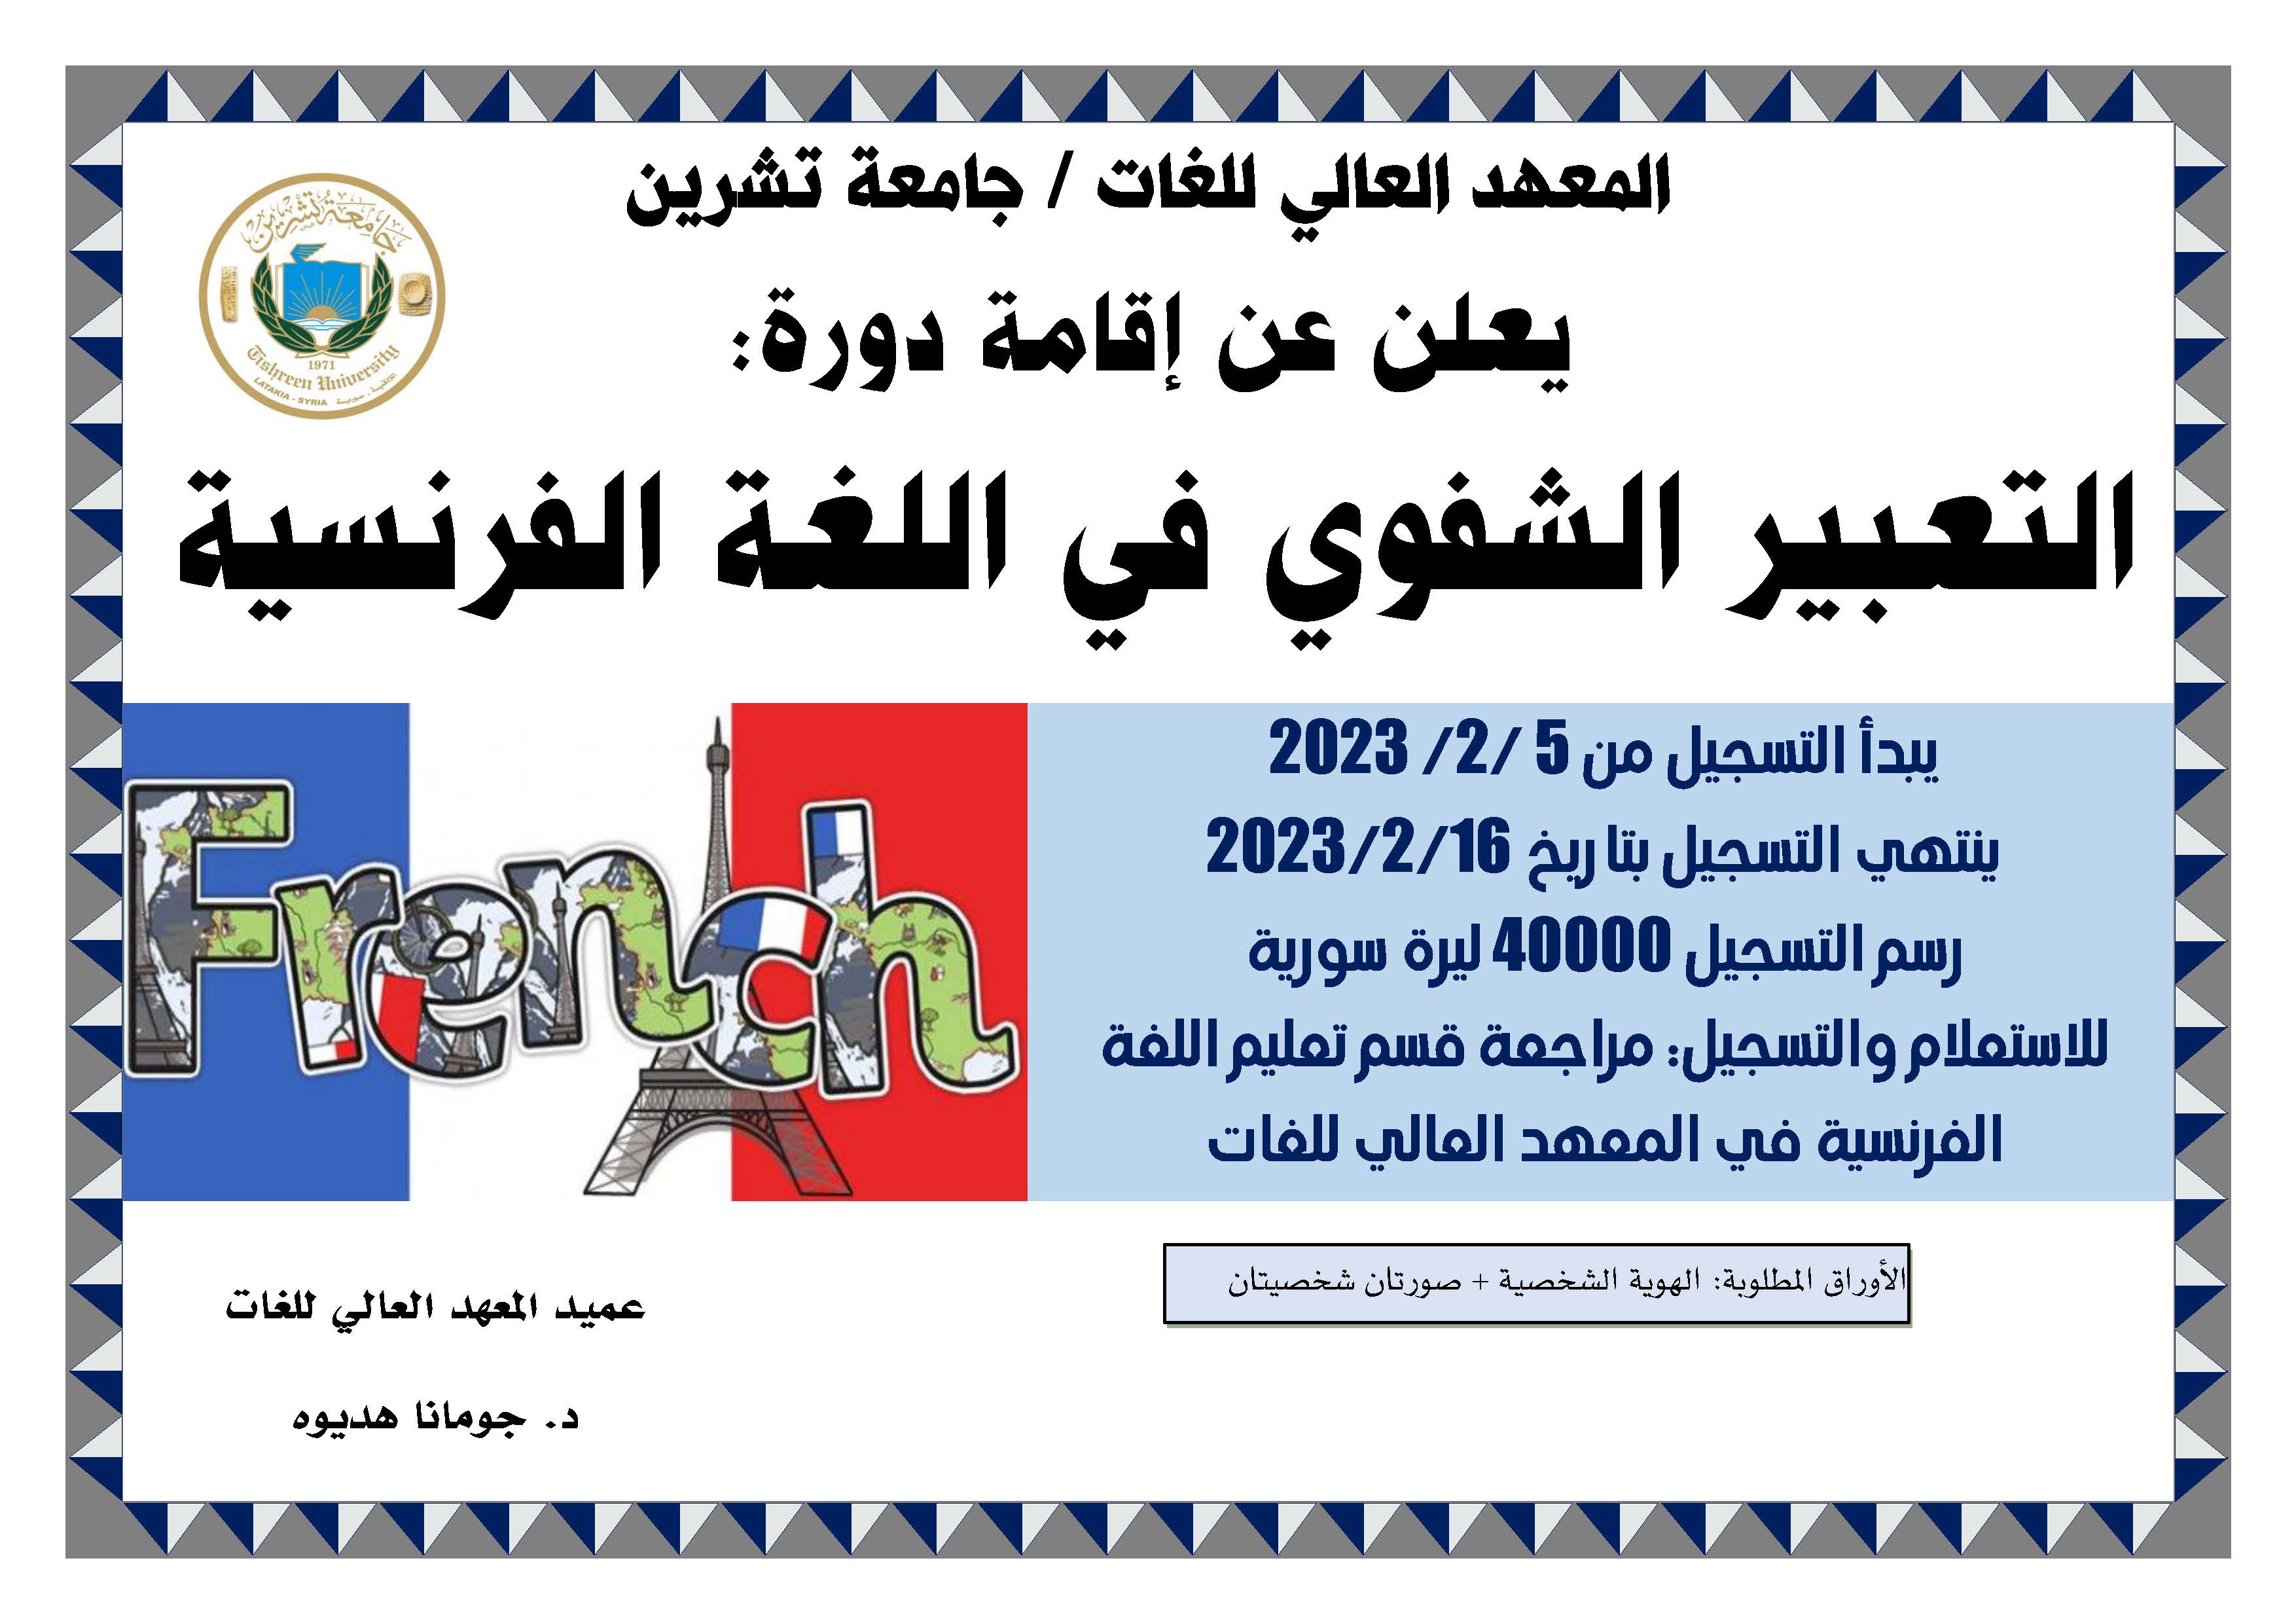 The Higher Institute of Languages ​​announces the oral expression course in the French language, which starts on 2-18-2023